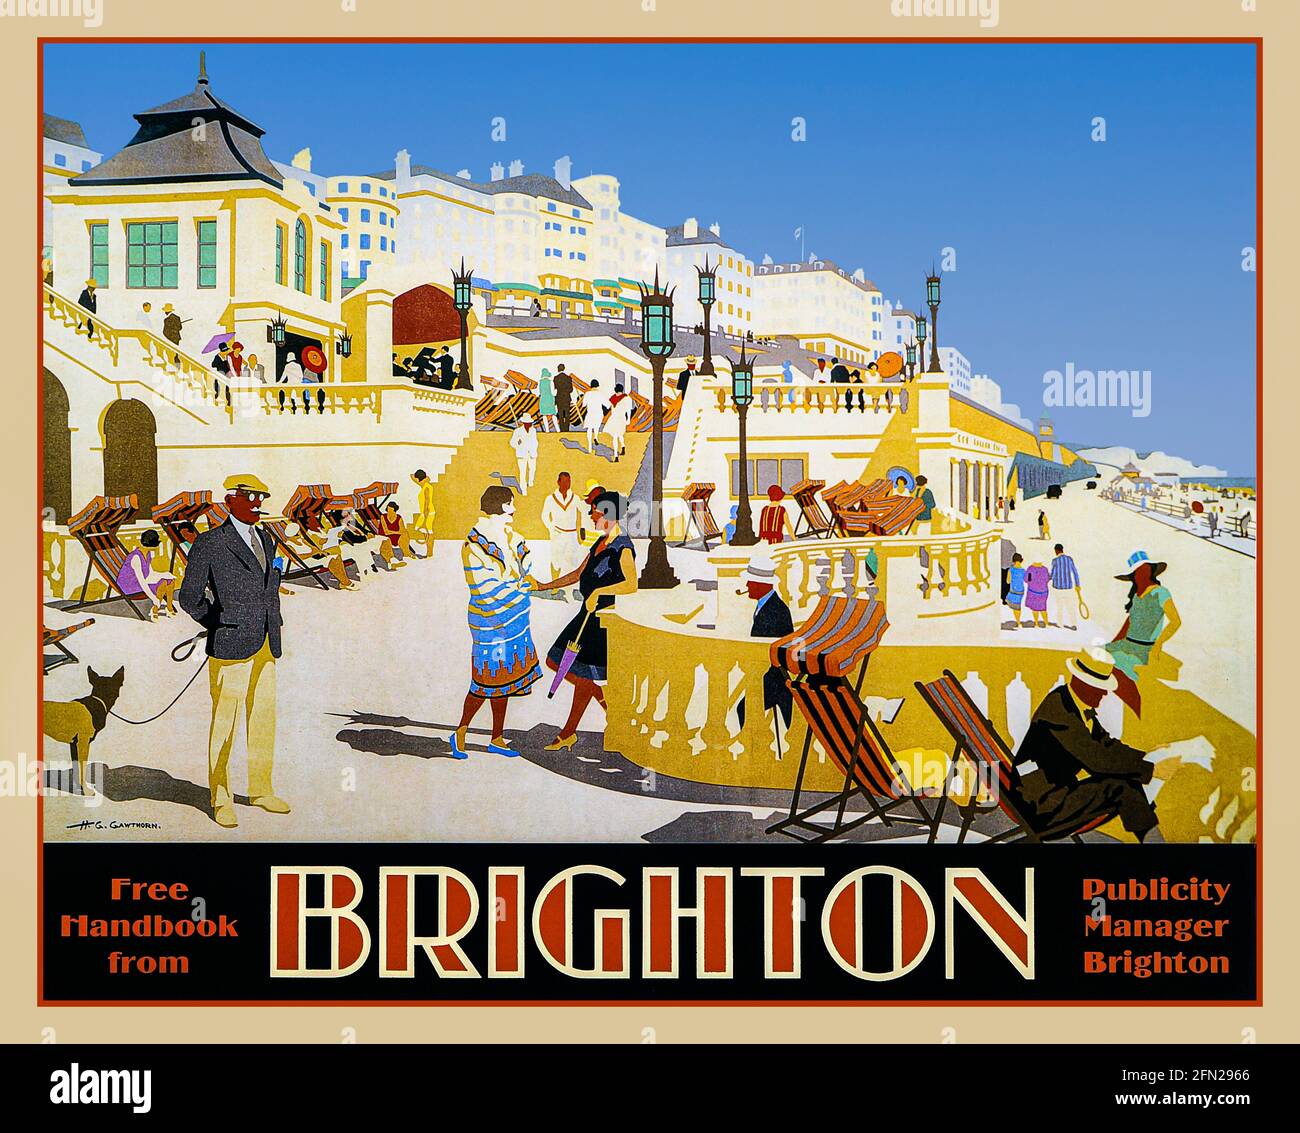 BRIGHTON POSTER RETRO 1930's Vintage BRIGHTON Travel Poster by H. G. Gawthorn Great Britain UK illustration lithograph Seafront Coast & Sea Stock Photo